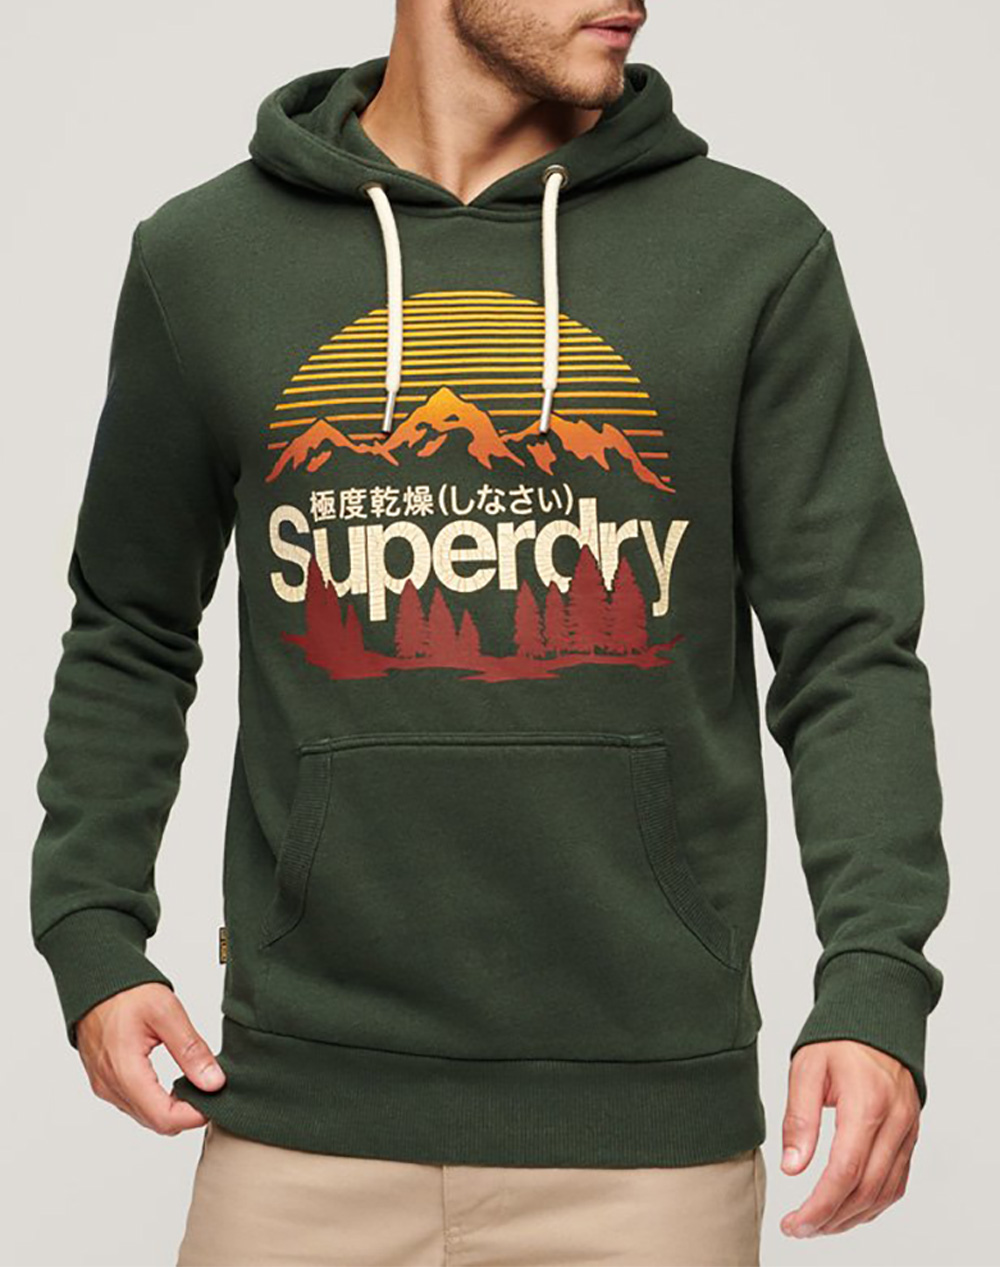 SUPERDRY SUPERDRY D3 OVIN CL GREAT OUTDOORS GRAPHIC ΦΟΥΤΕΡ ΑΝΔΡΙΚΟ M2013146A-3KV Green